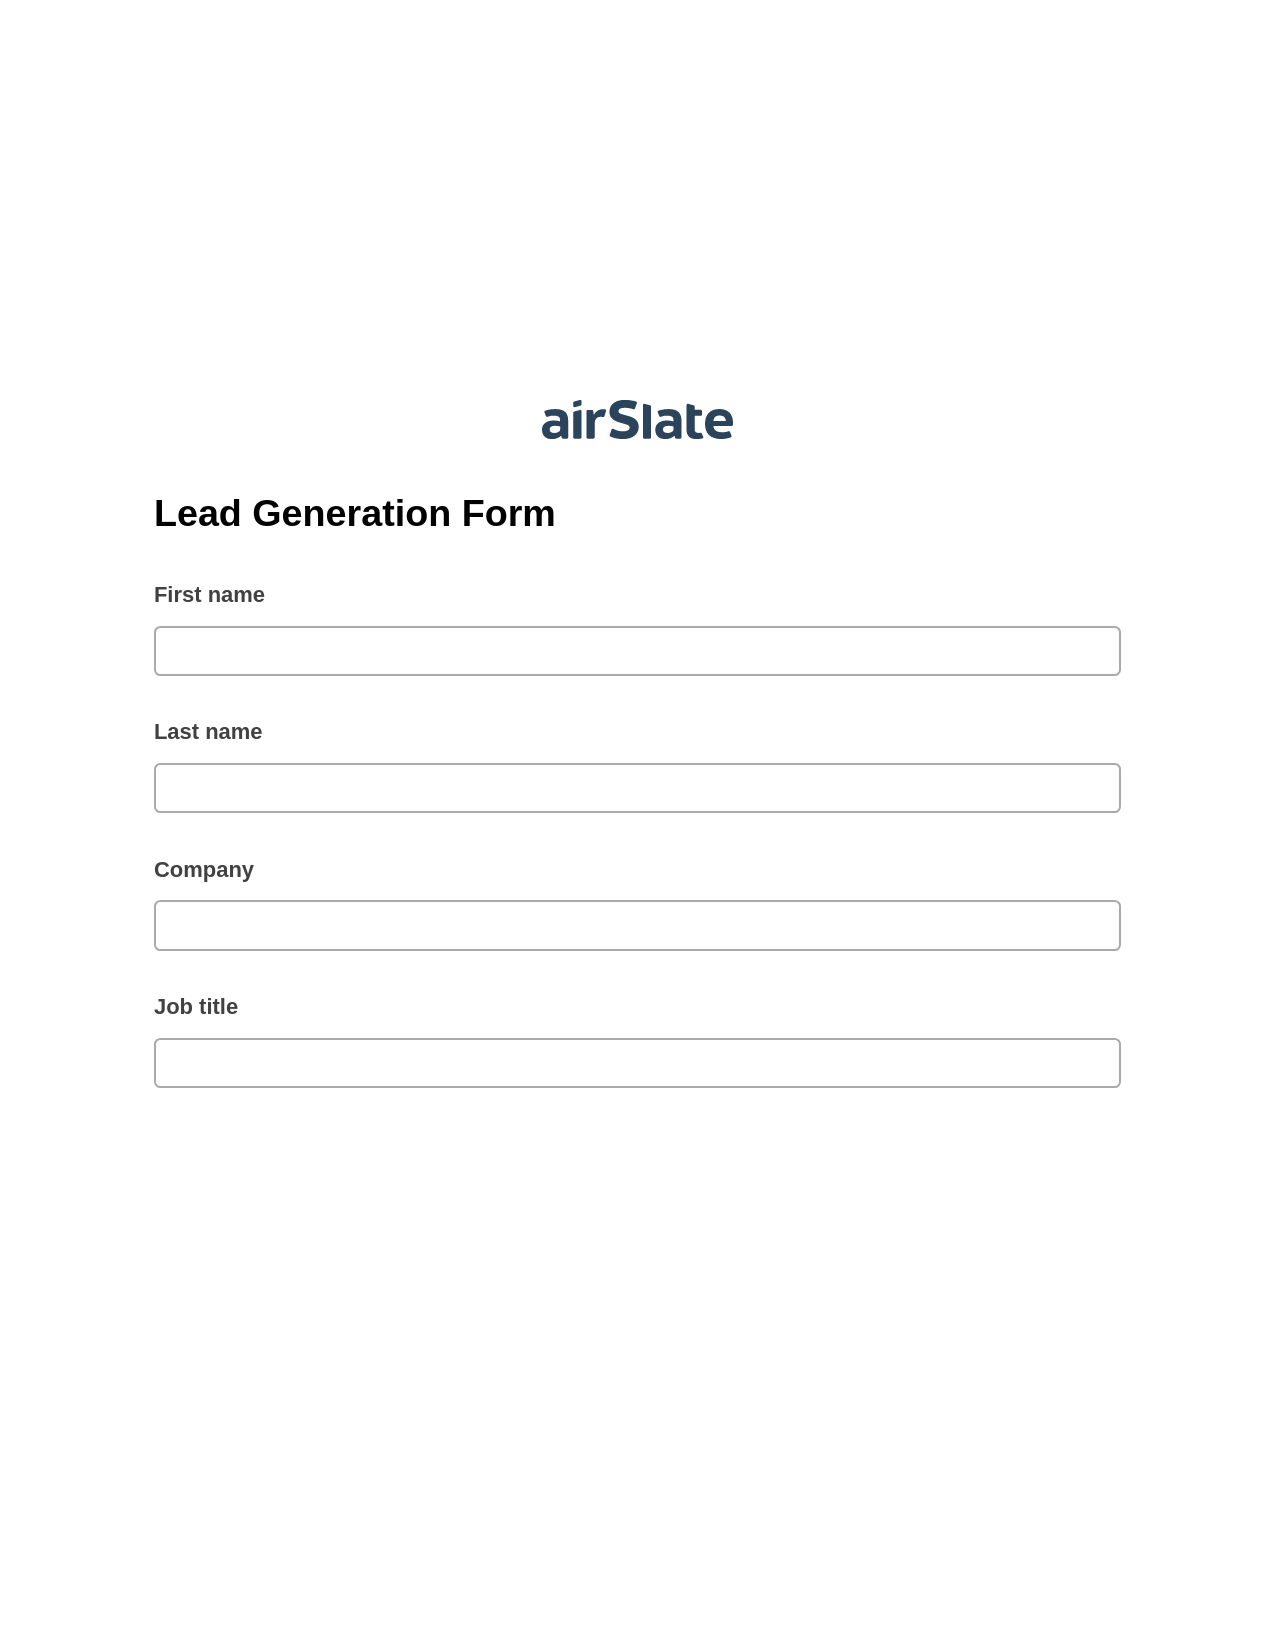 Multirole Lead Generation Form Pre-fill from another Slate Bot, Remove Tags From Slate Bot, Archive to Google Drive Bot